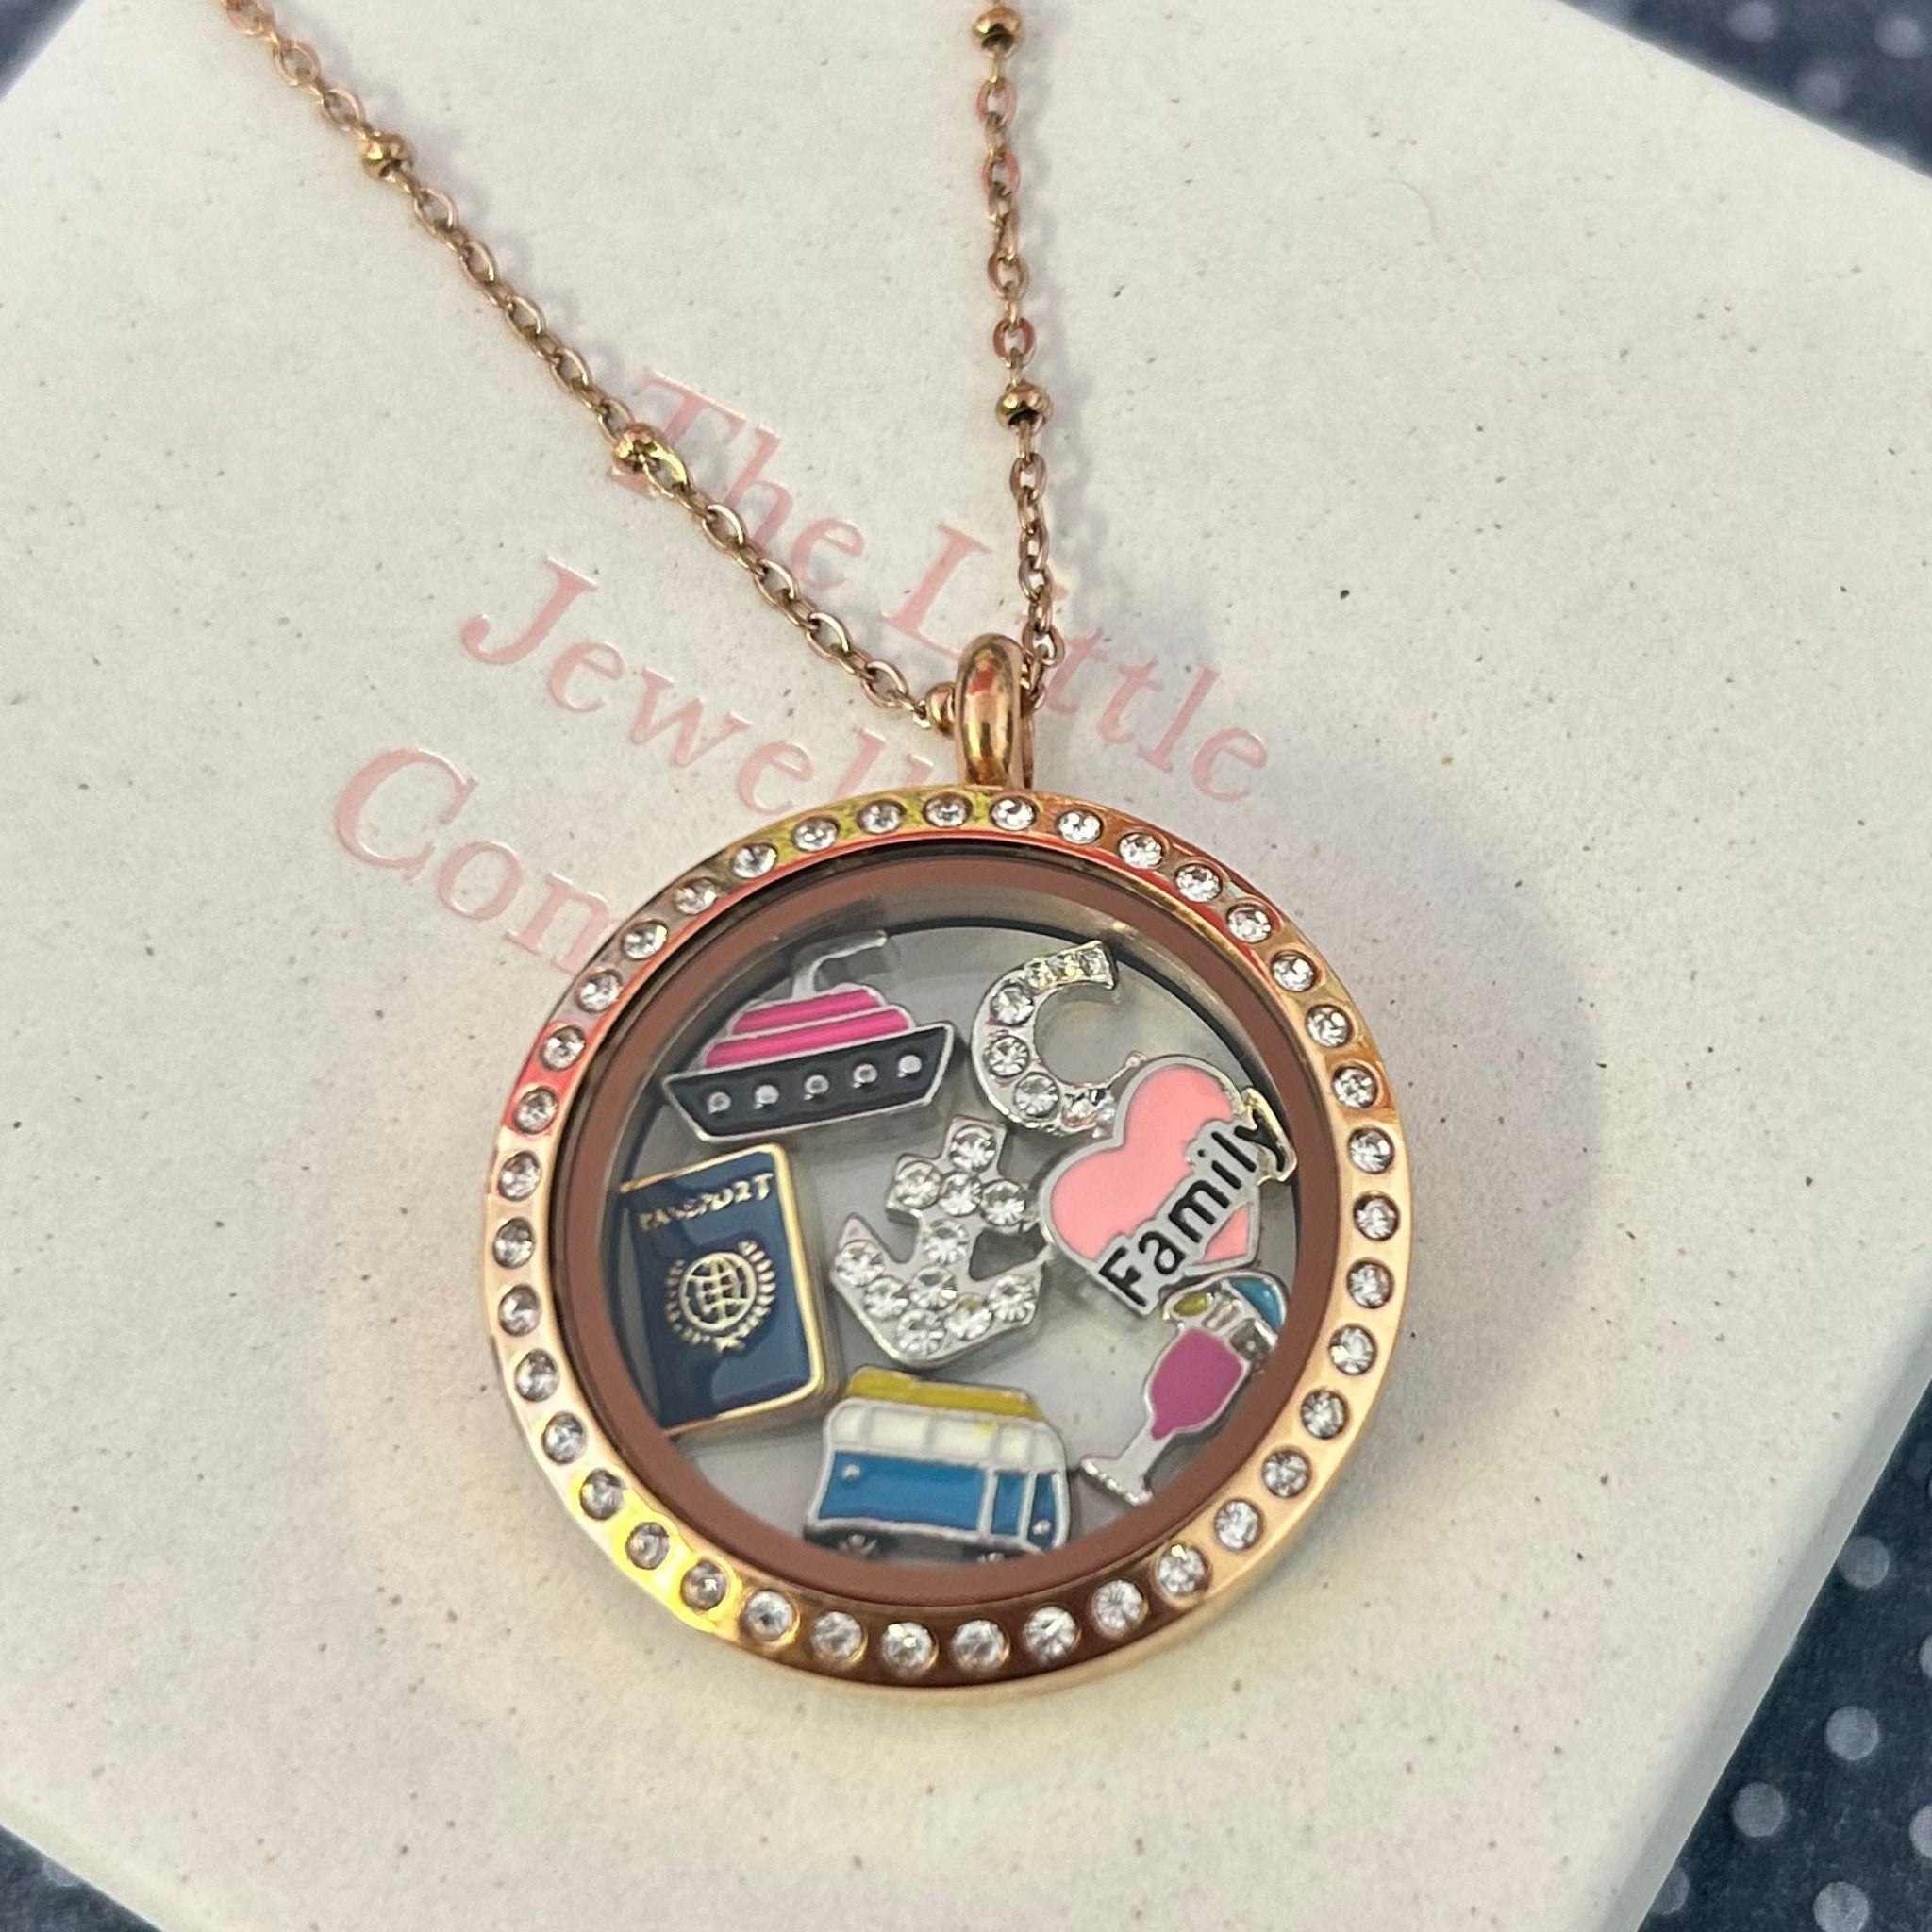 Amazon.in: Buy Gold Round Living Memory Floating Photo Locket Pendant  Necklace Chain Gift Online at Low Prices in India | Alcoa Prime Reviews &  Ratings